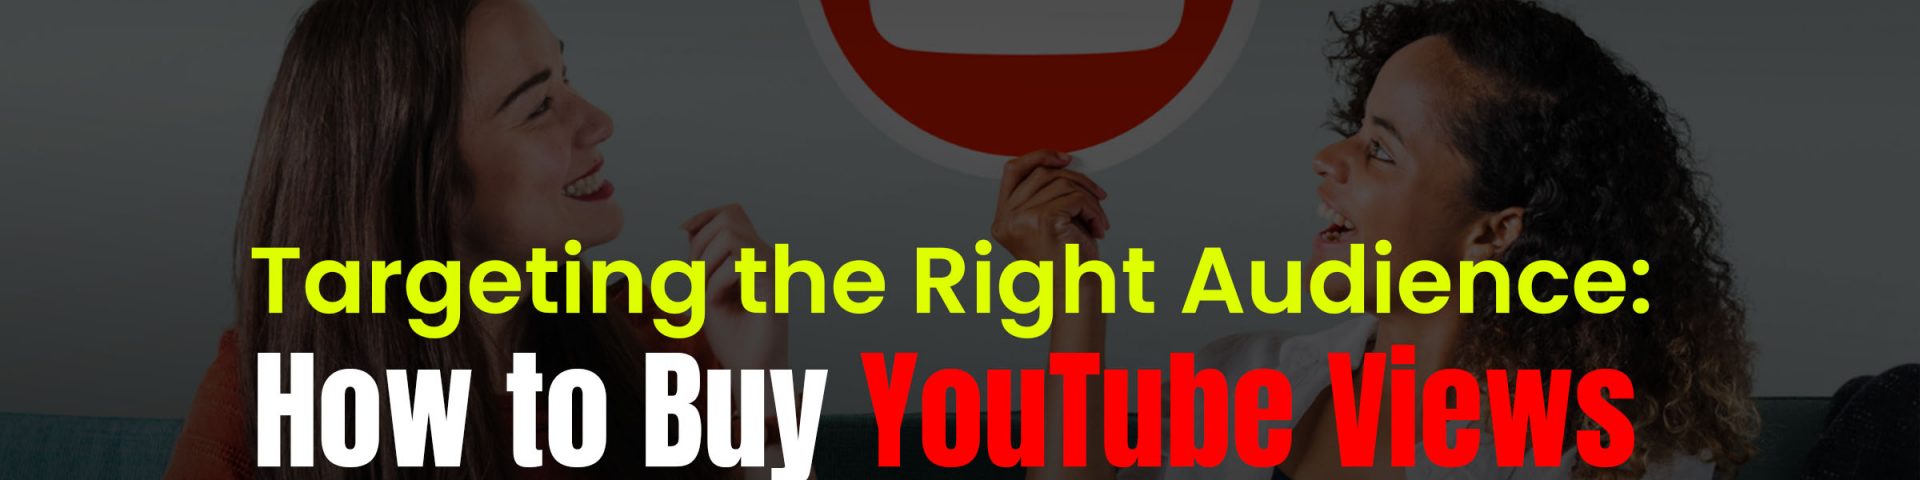 How to Buy YouTube Views Strategically